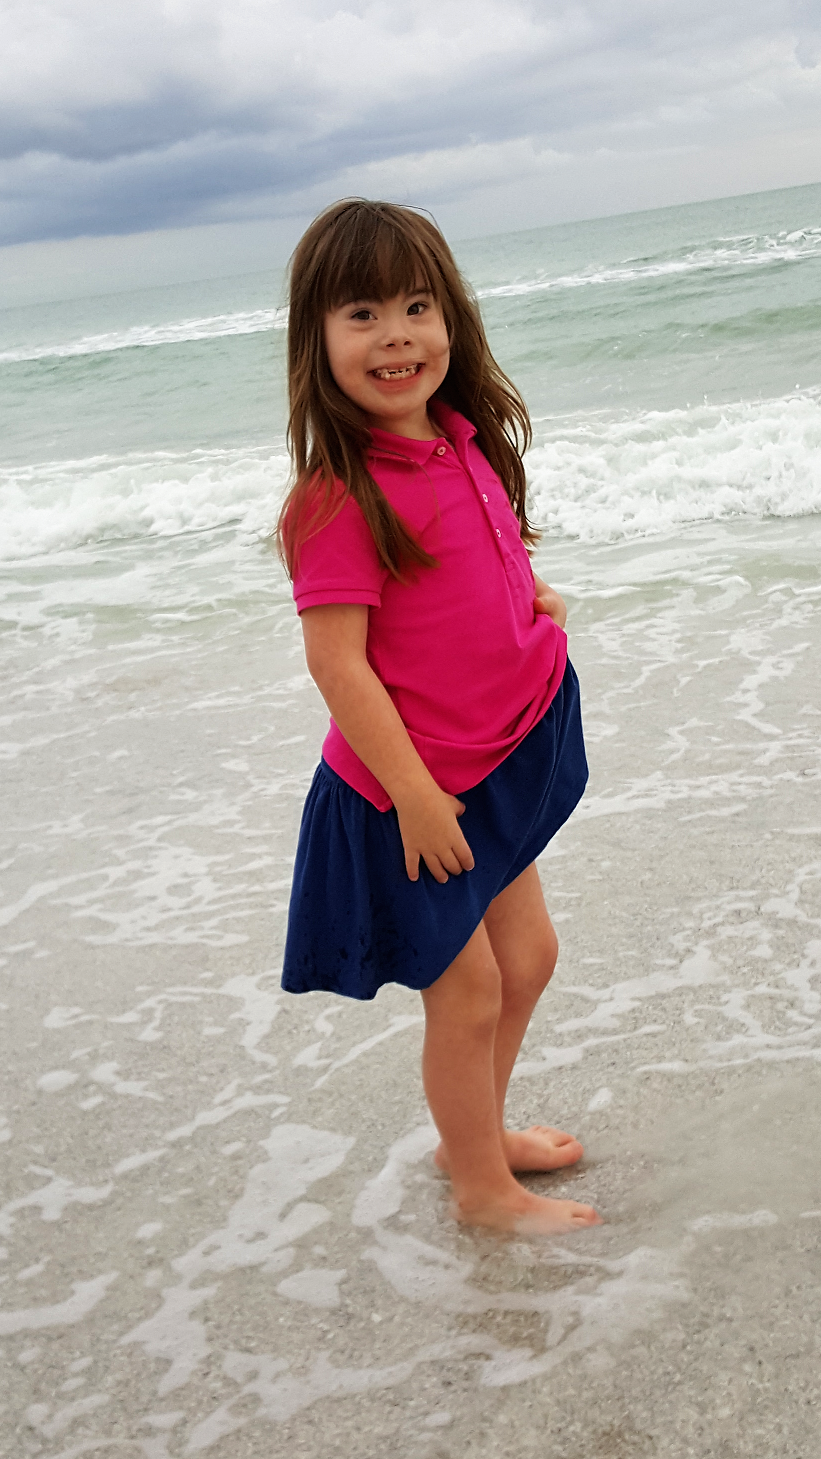 Child with Down Syndrome having fun on Beach in Florida